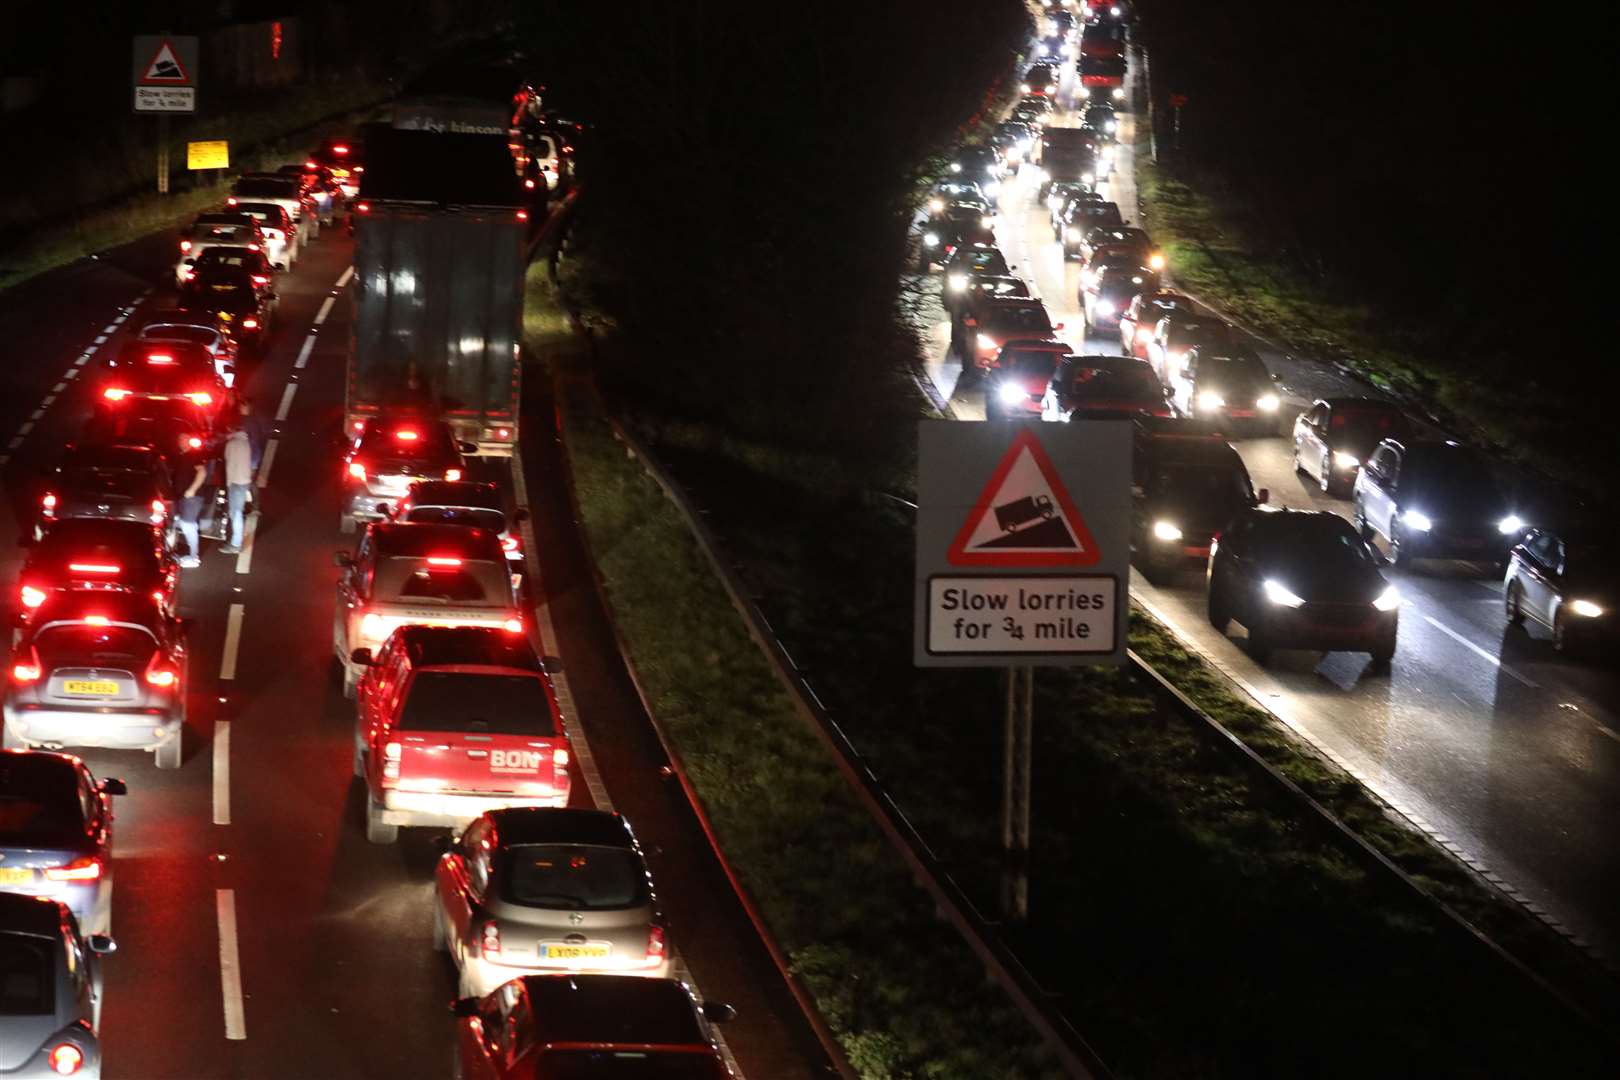 Long queues on the A249 as people tried to get to the event. Picture: UKNiP